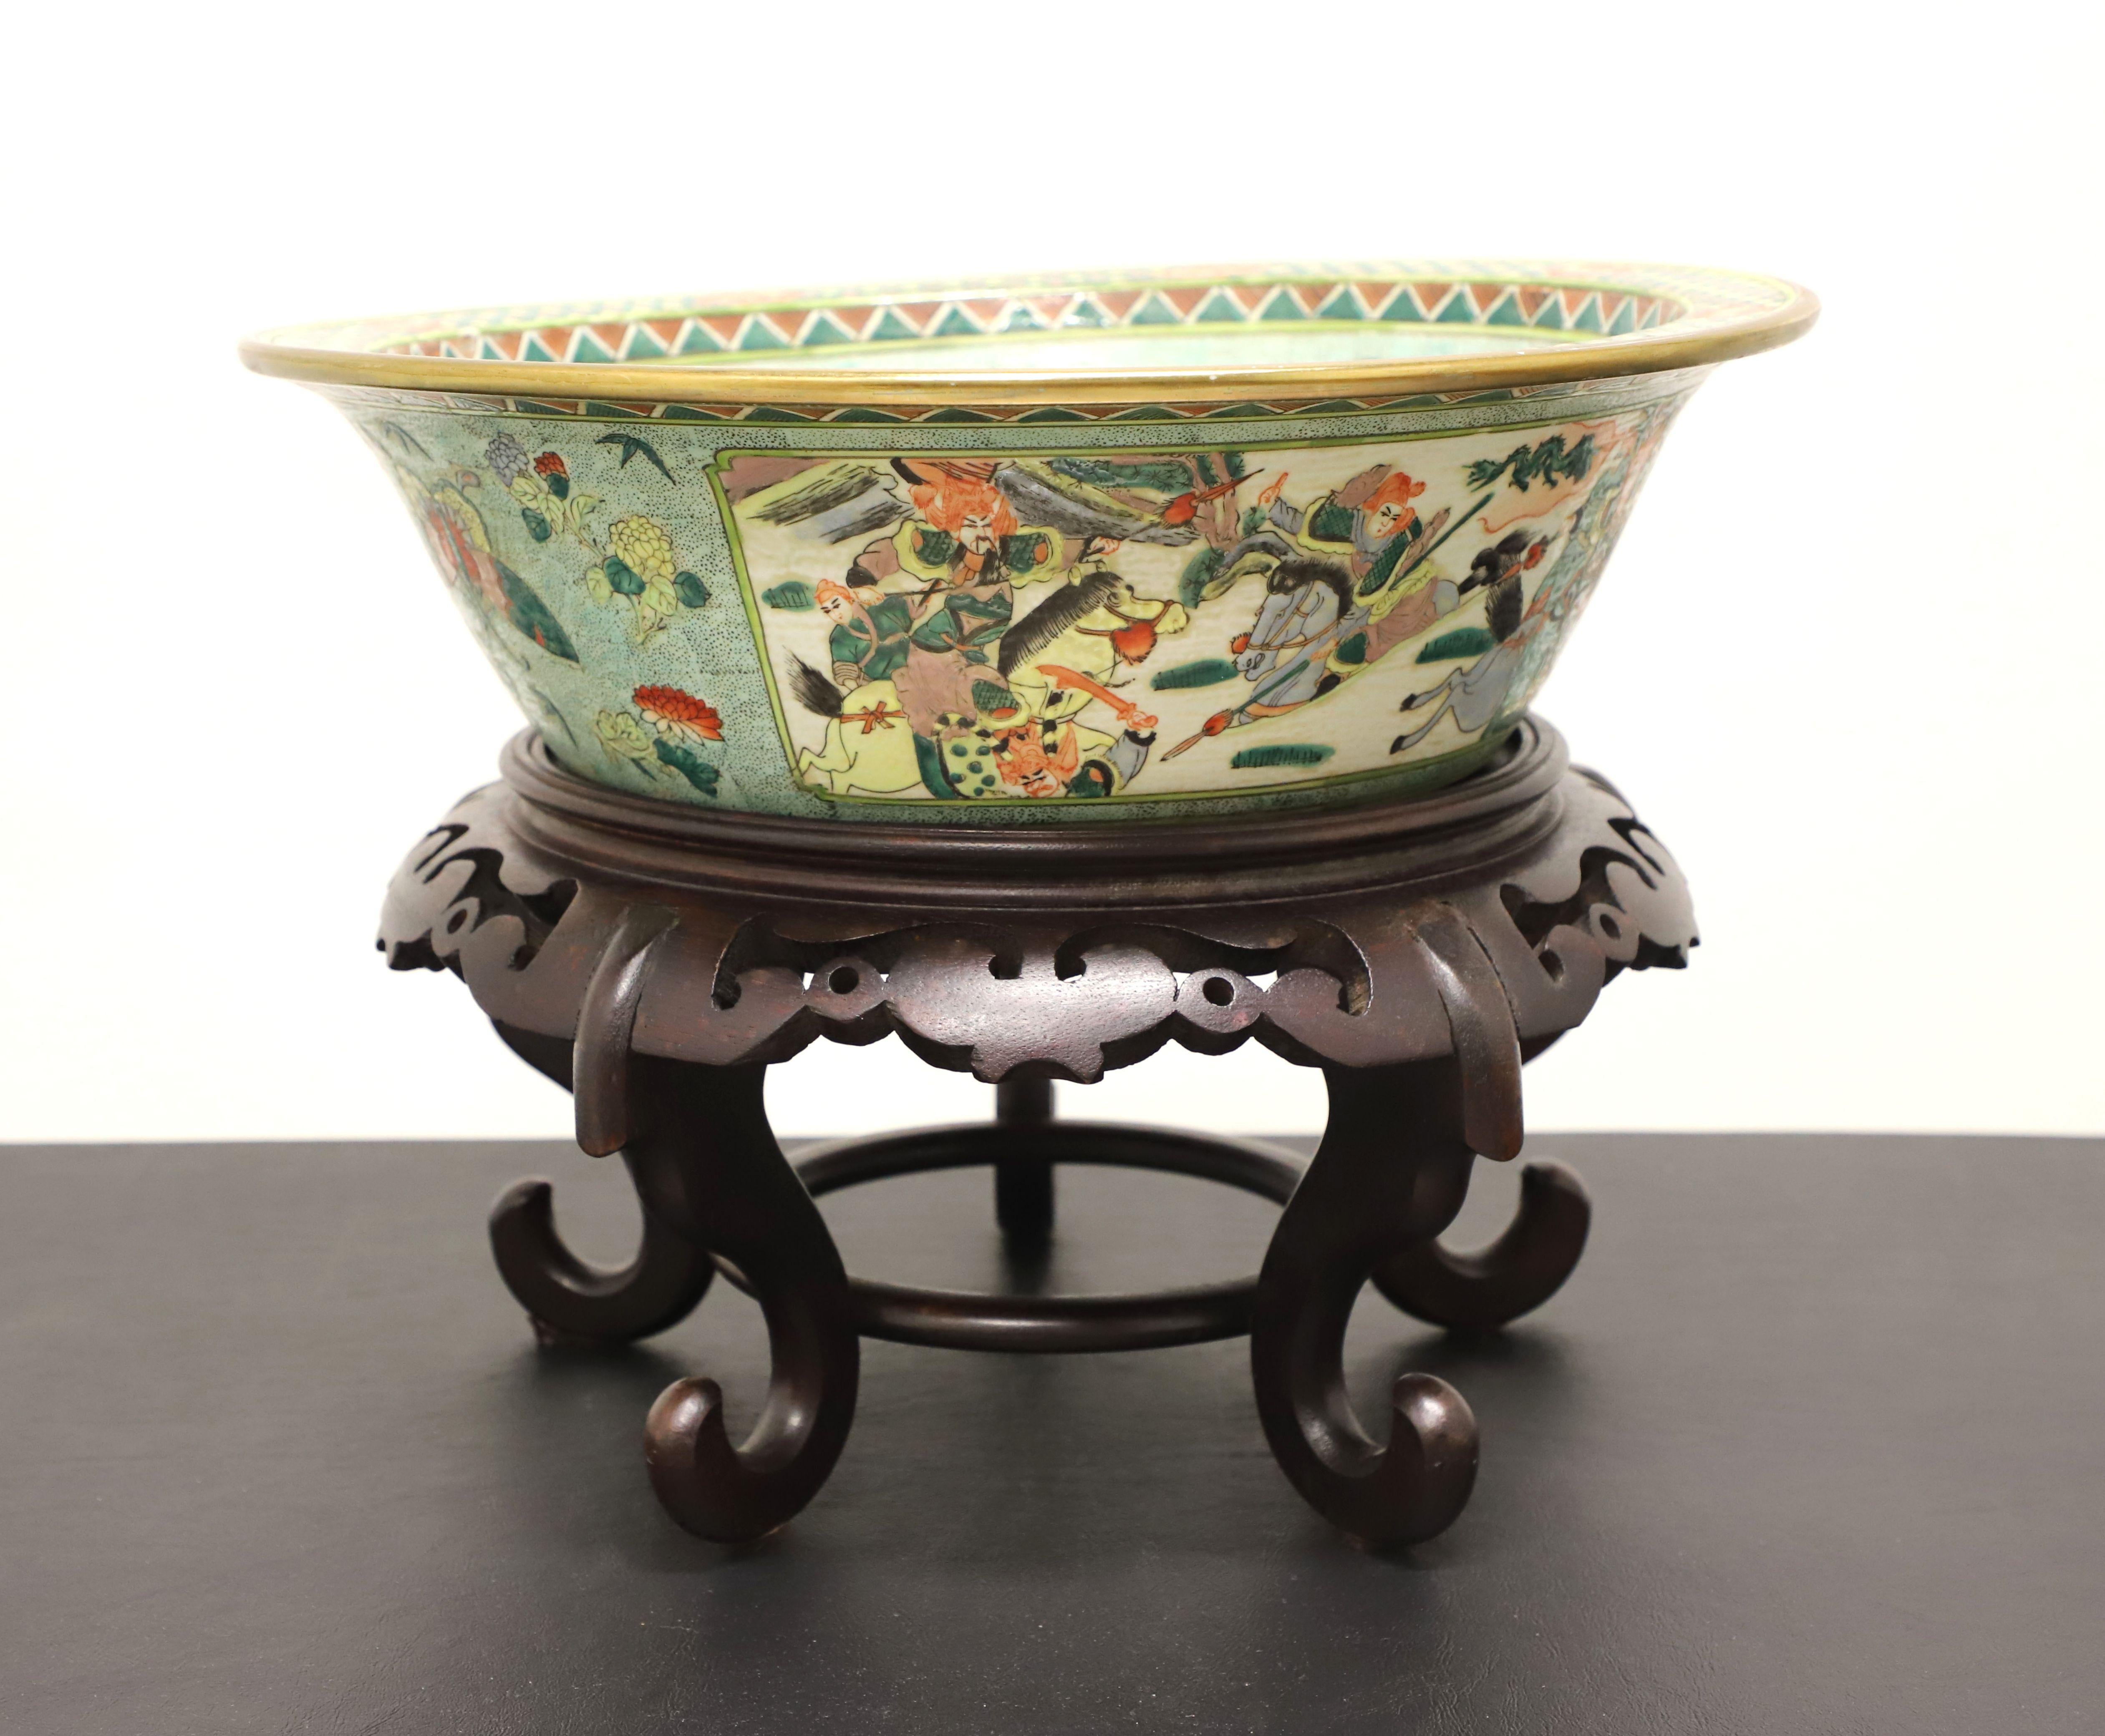 Wood Mid 20th Century Chinese Porcelain Bowl on Stand